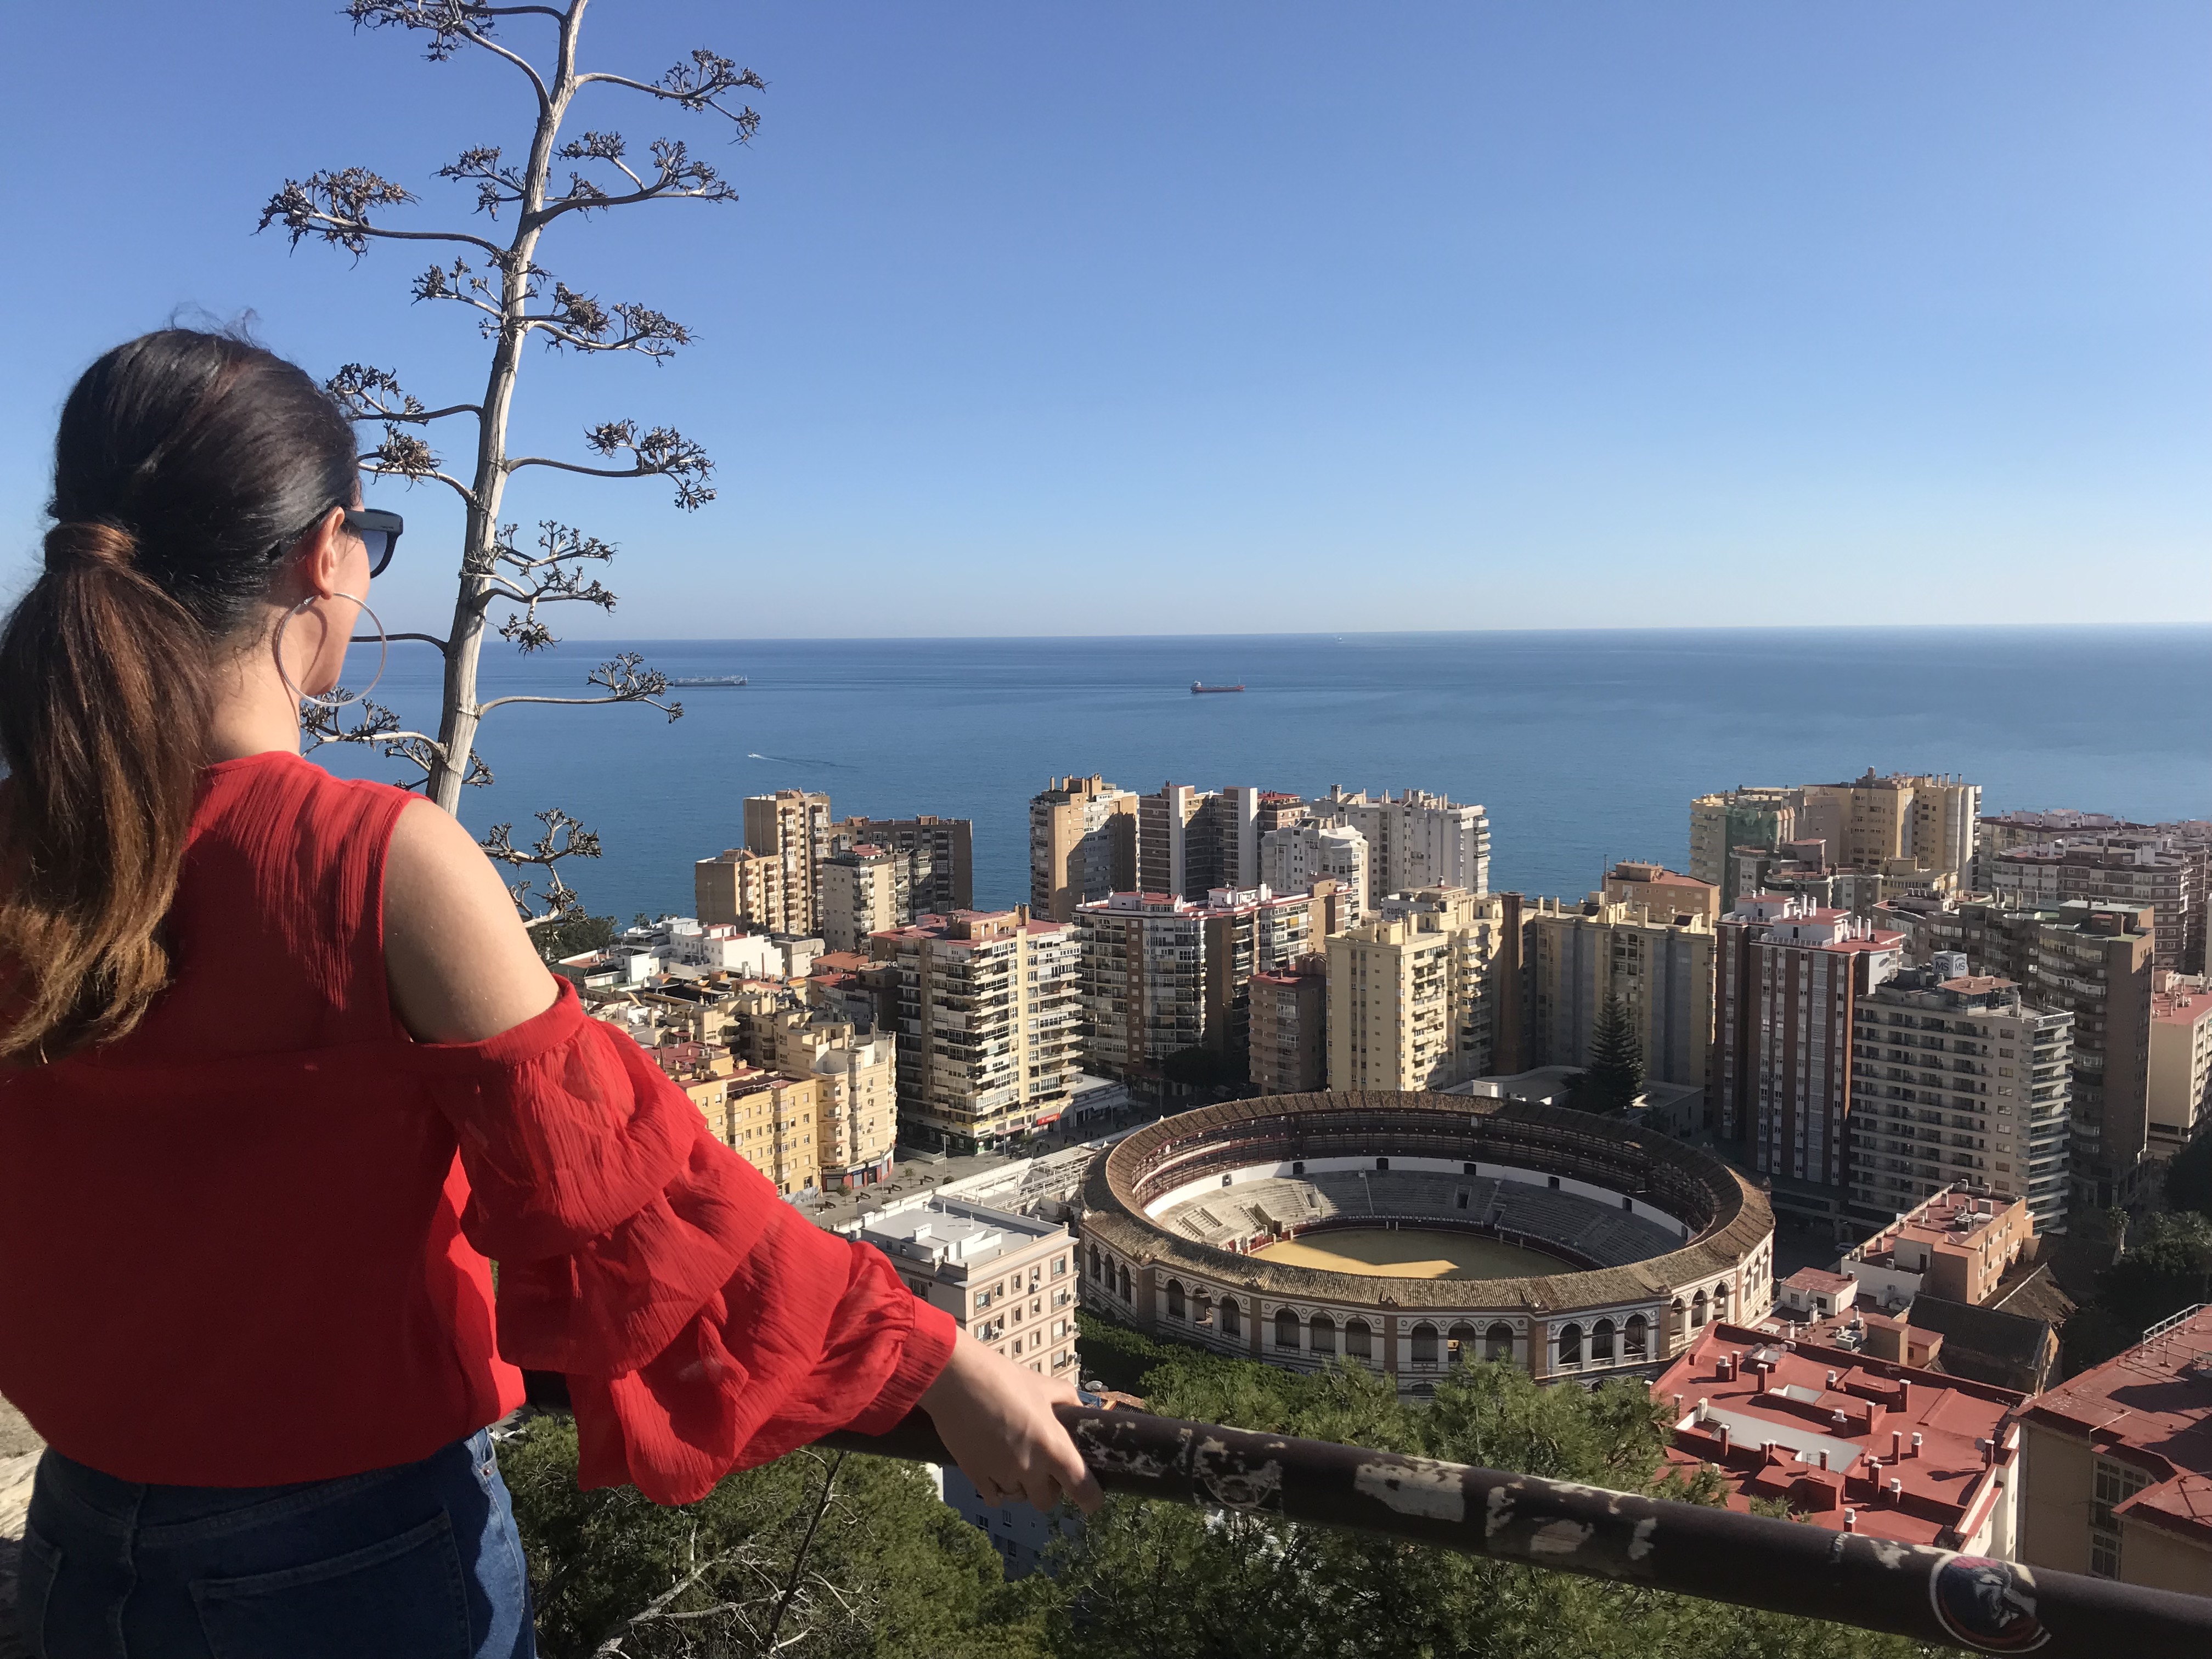 [:it]Cosa vedere a Malaga [:en]WHAT TO SEE IN MALAGA[:]